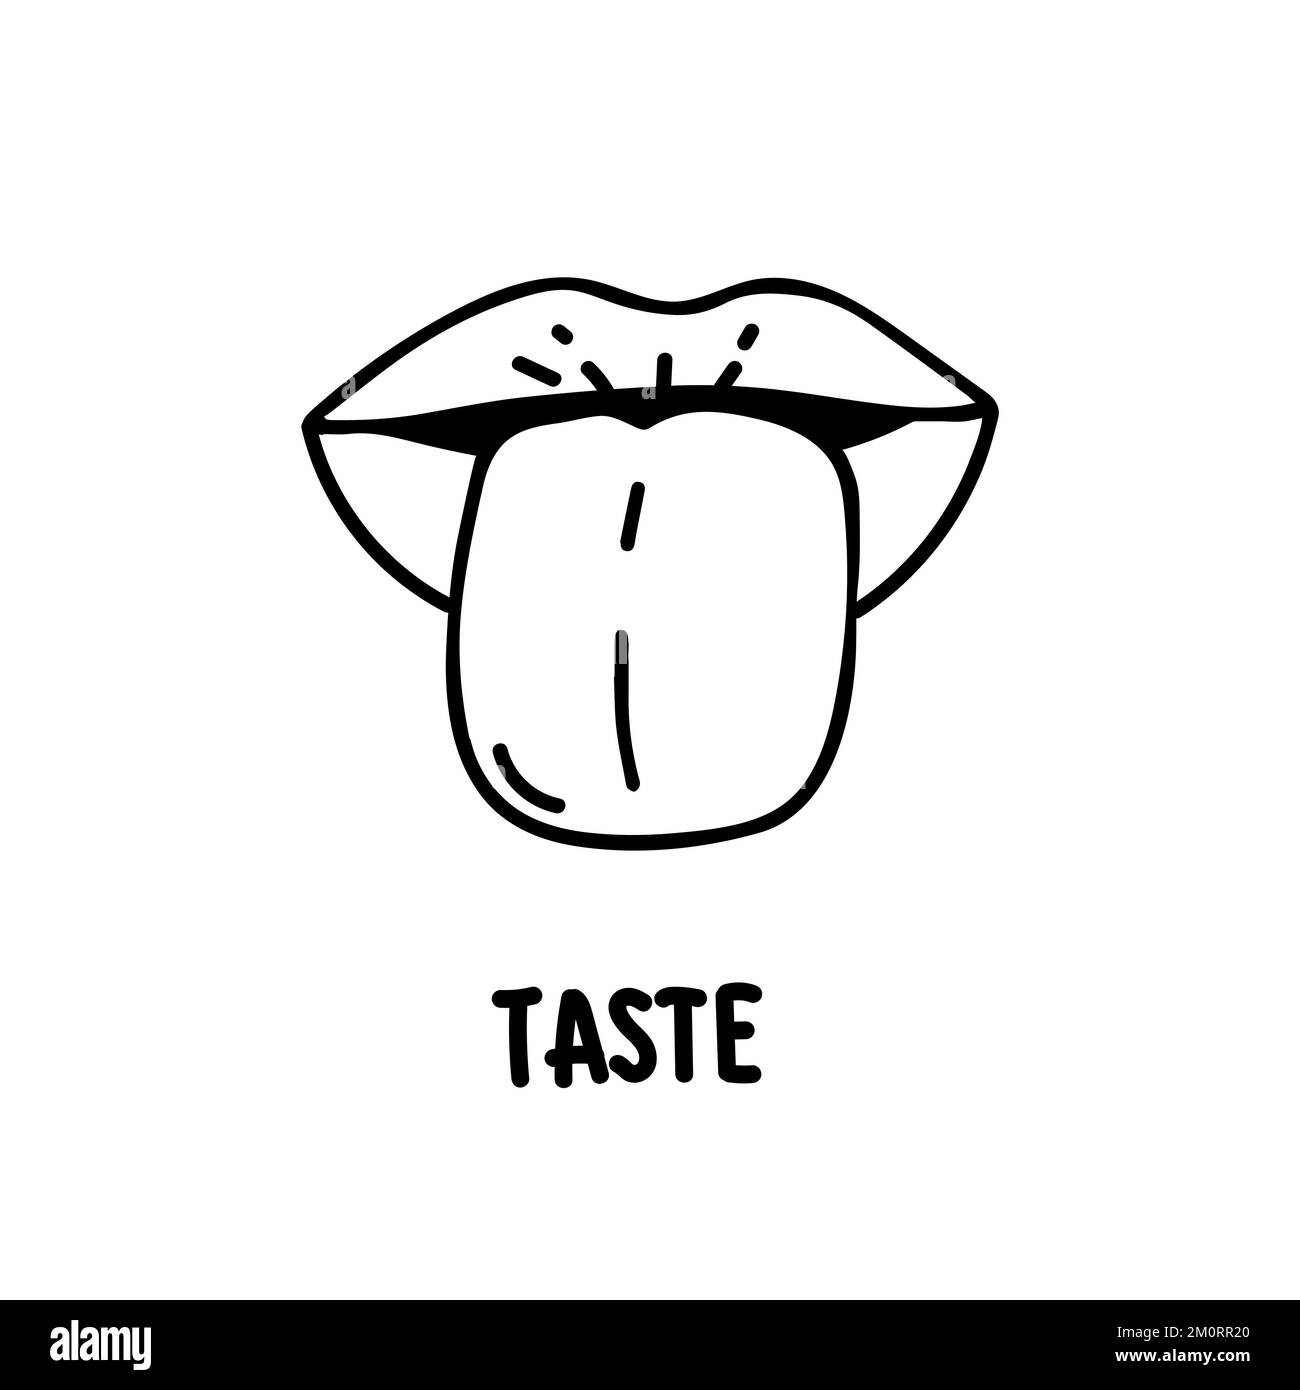 Taste scheme concept. Vector flat modern color illustration. Tongue with lips. Mouth tasty sense symbol. Umami, sweet, sour, bitter, salty symbol icon Stock Vector